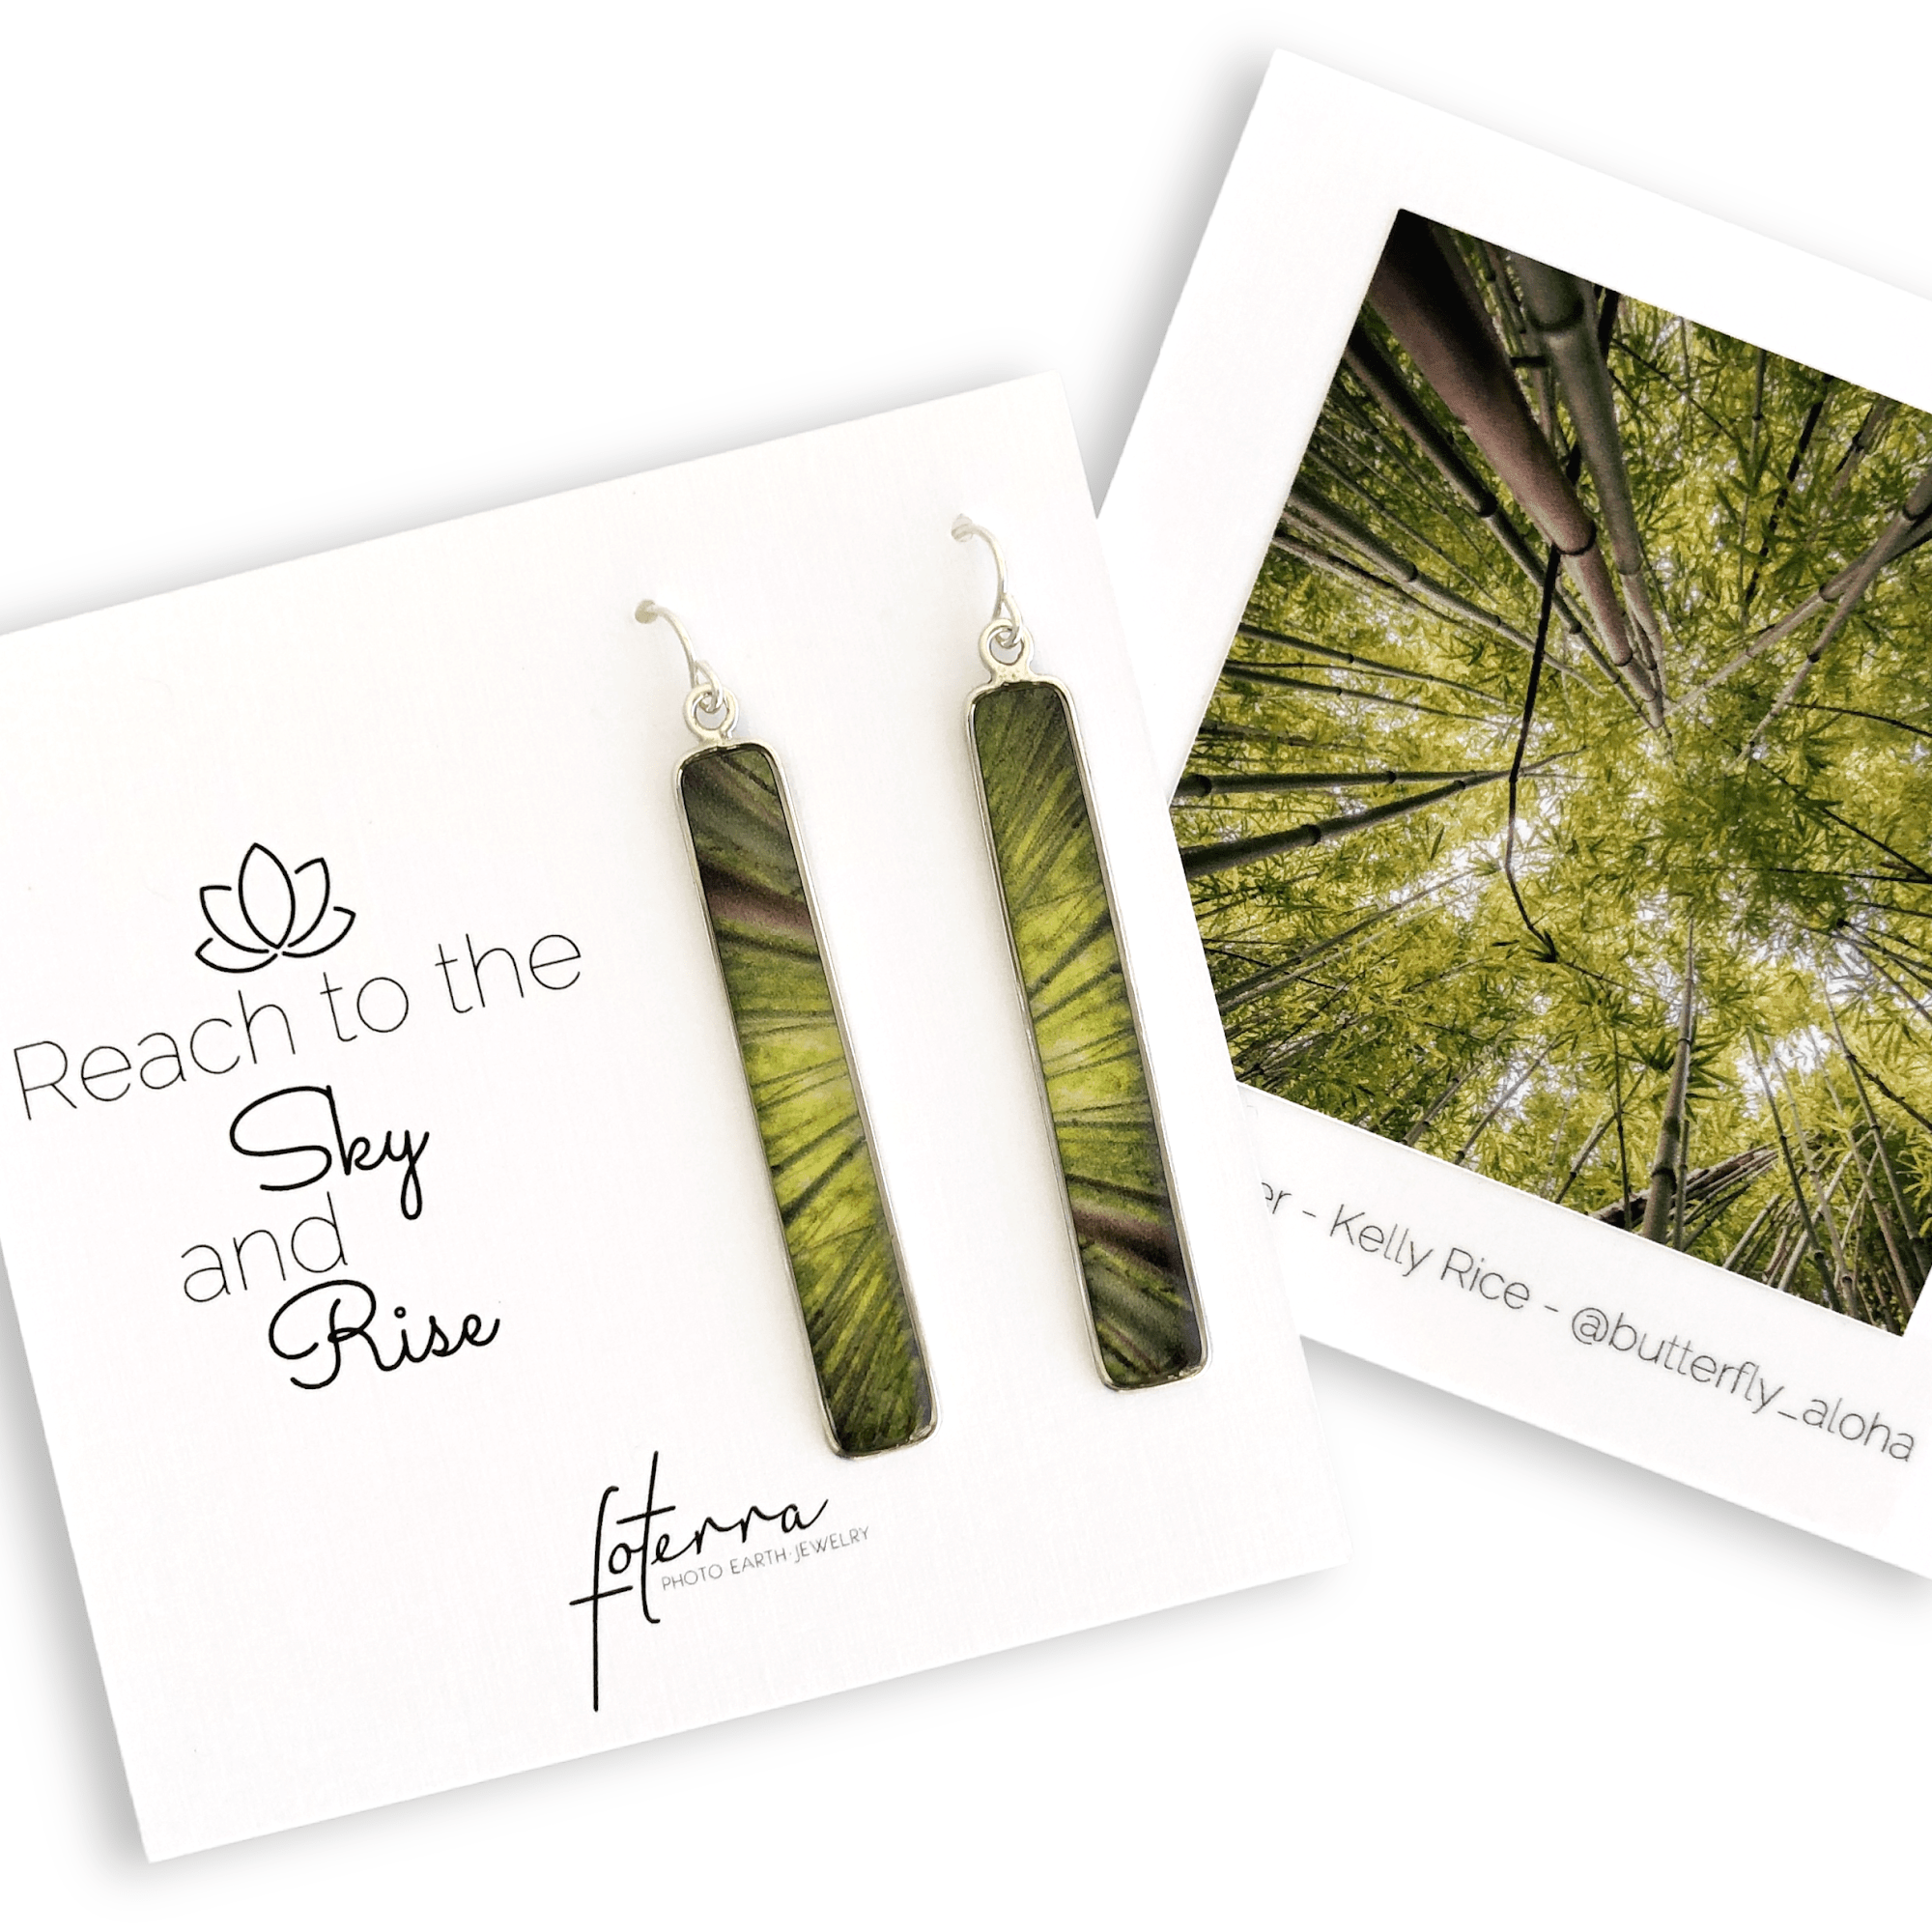 Bamboo Forest Earrings by Kelly Rice